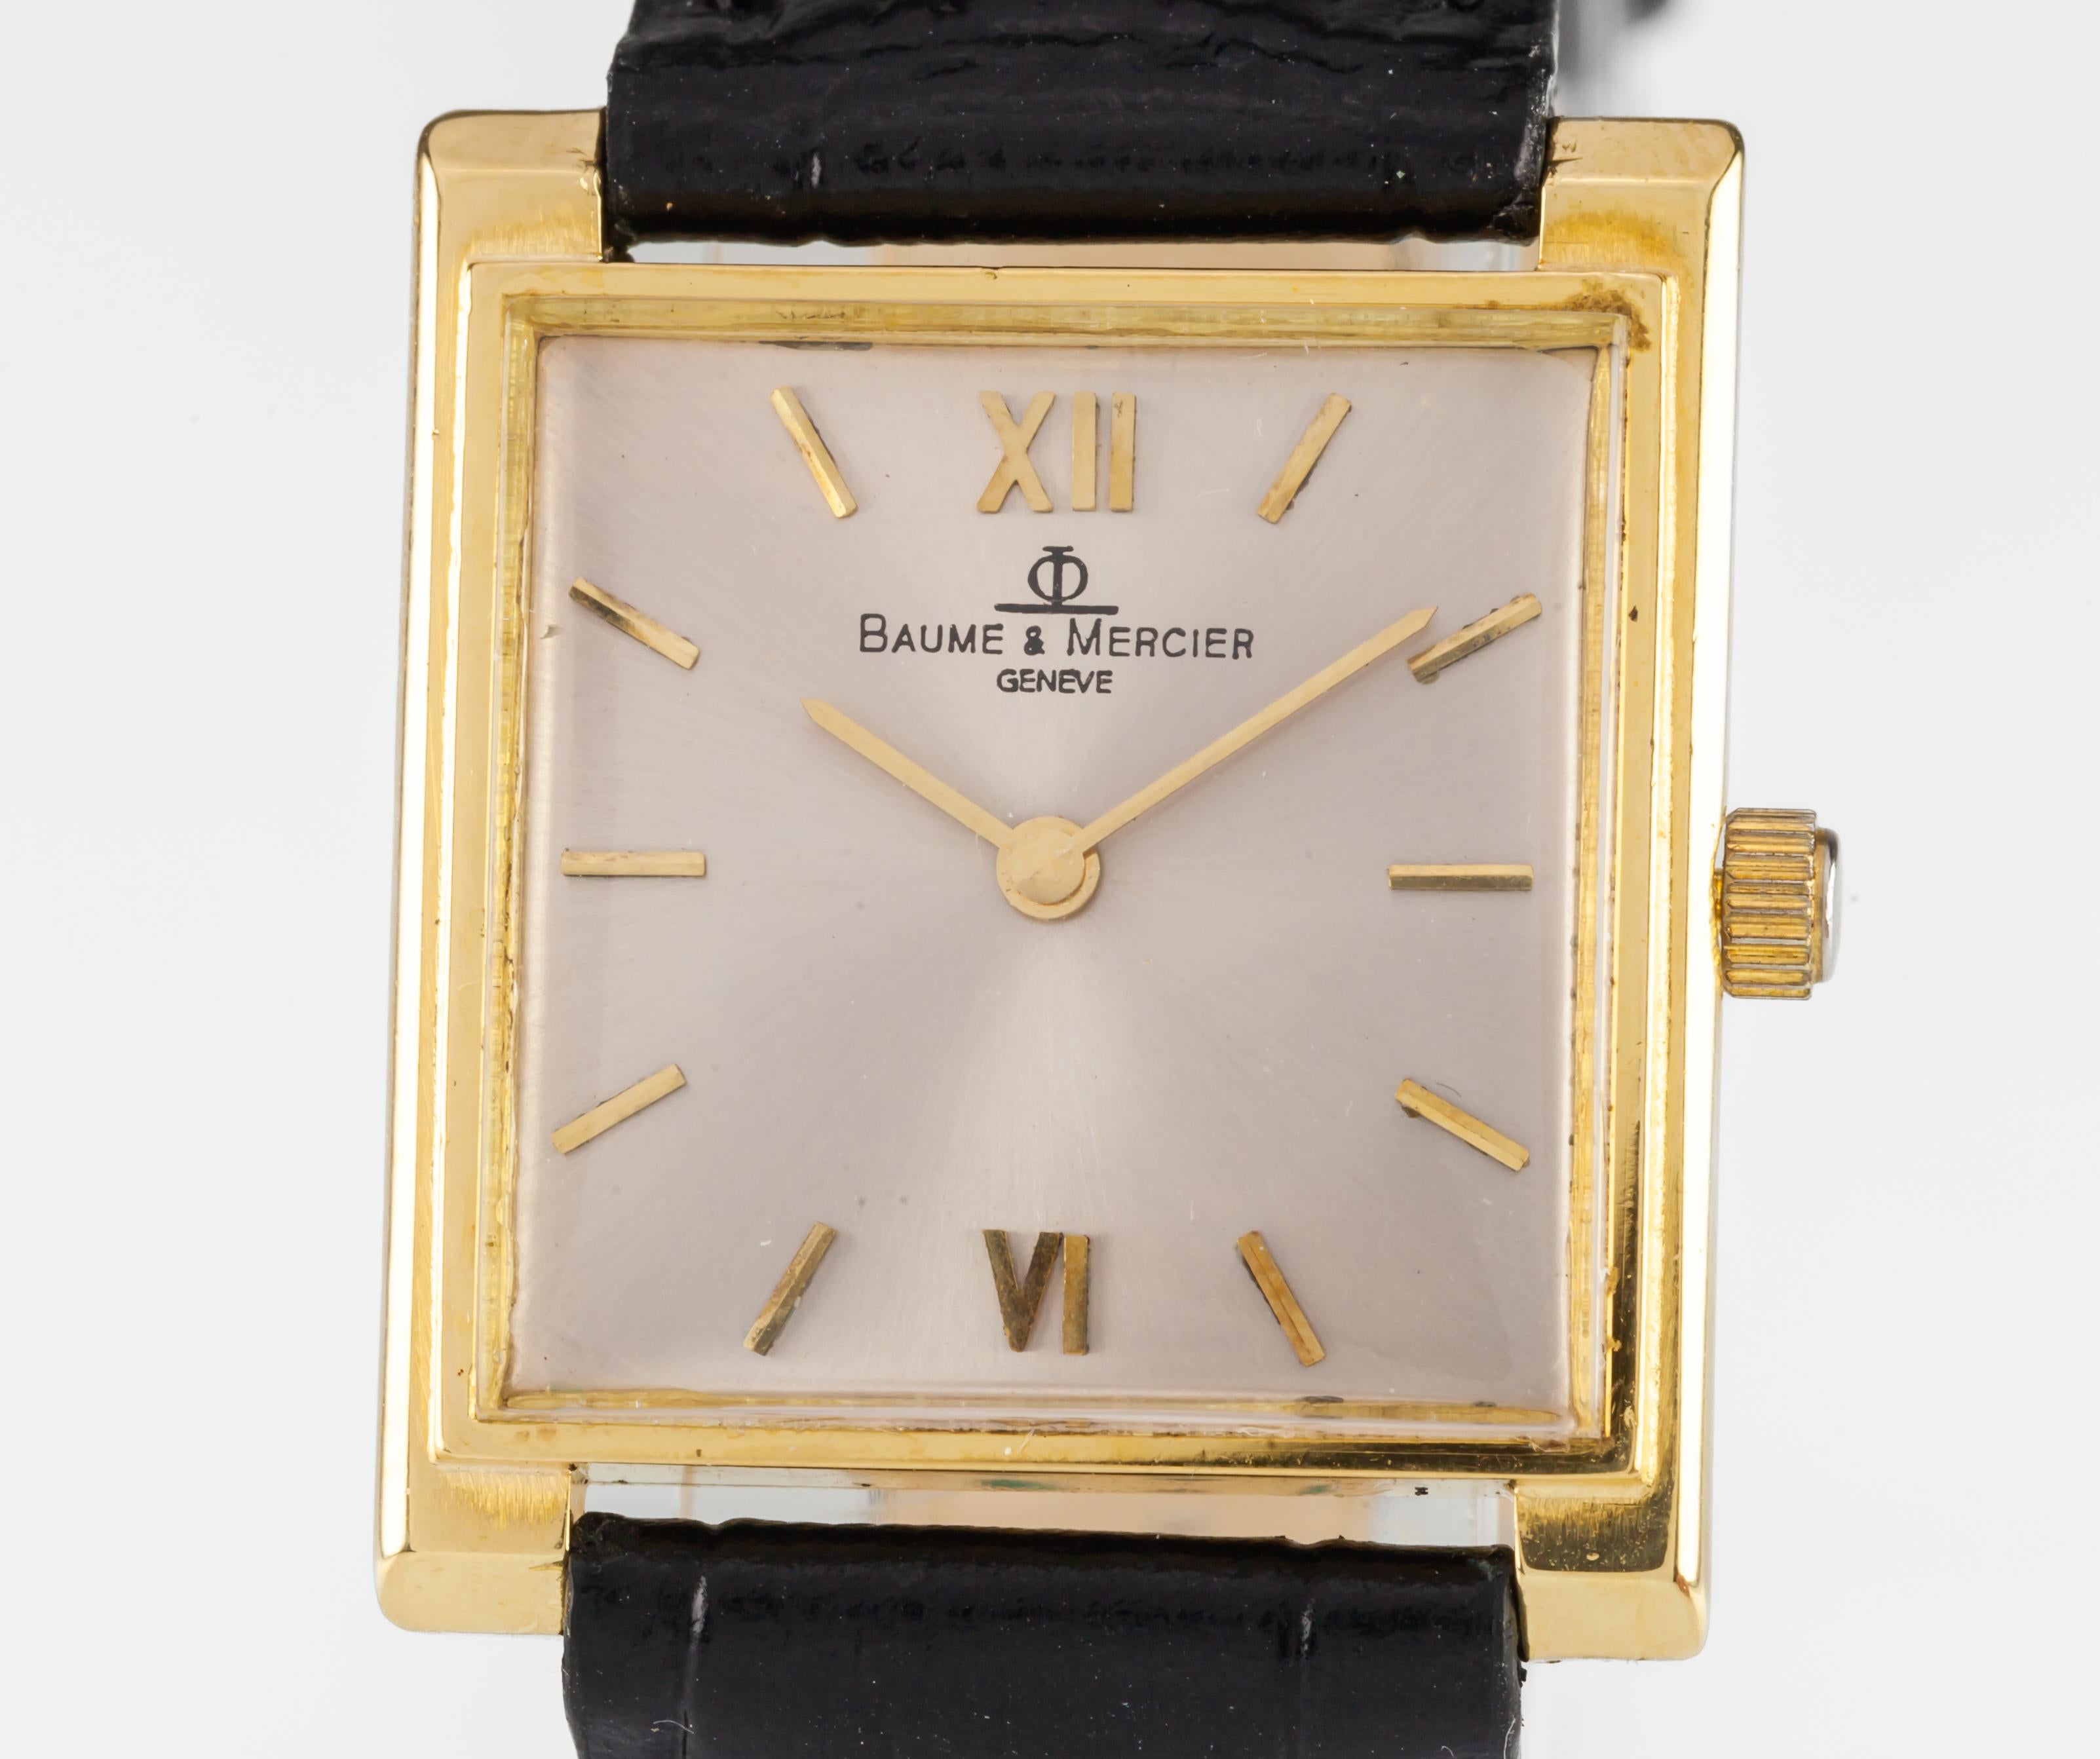 Vintage 18k Yellow Gold Baume & Mercier Hand-Winding Watch w/ Off-White Dial

Movement #2512
17 Jewel Hand-Winding Movement
Serial #37025
Case #293407

18k Yellow Gold Case
24 mm Wide (26 mm w/ Crown)
22 mm Long
Lug-to-Lug Distance = 27